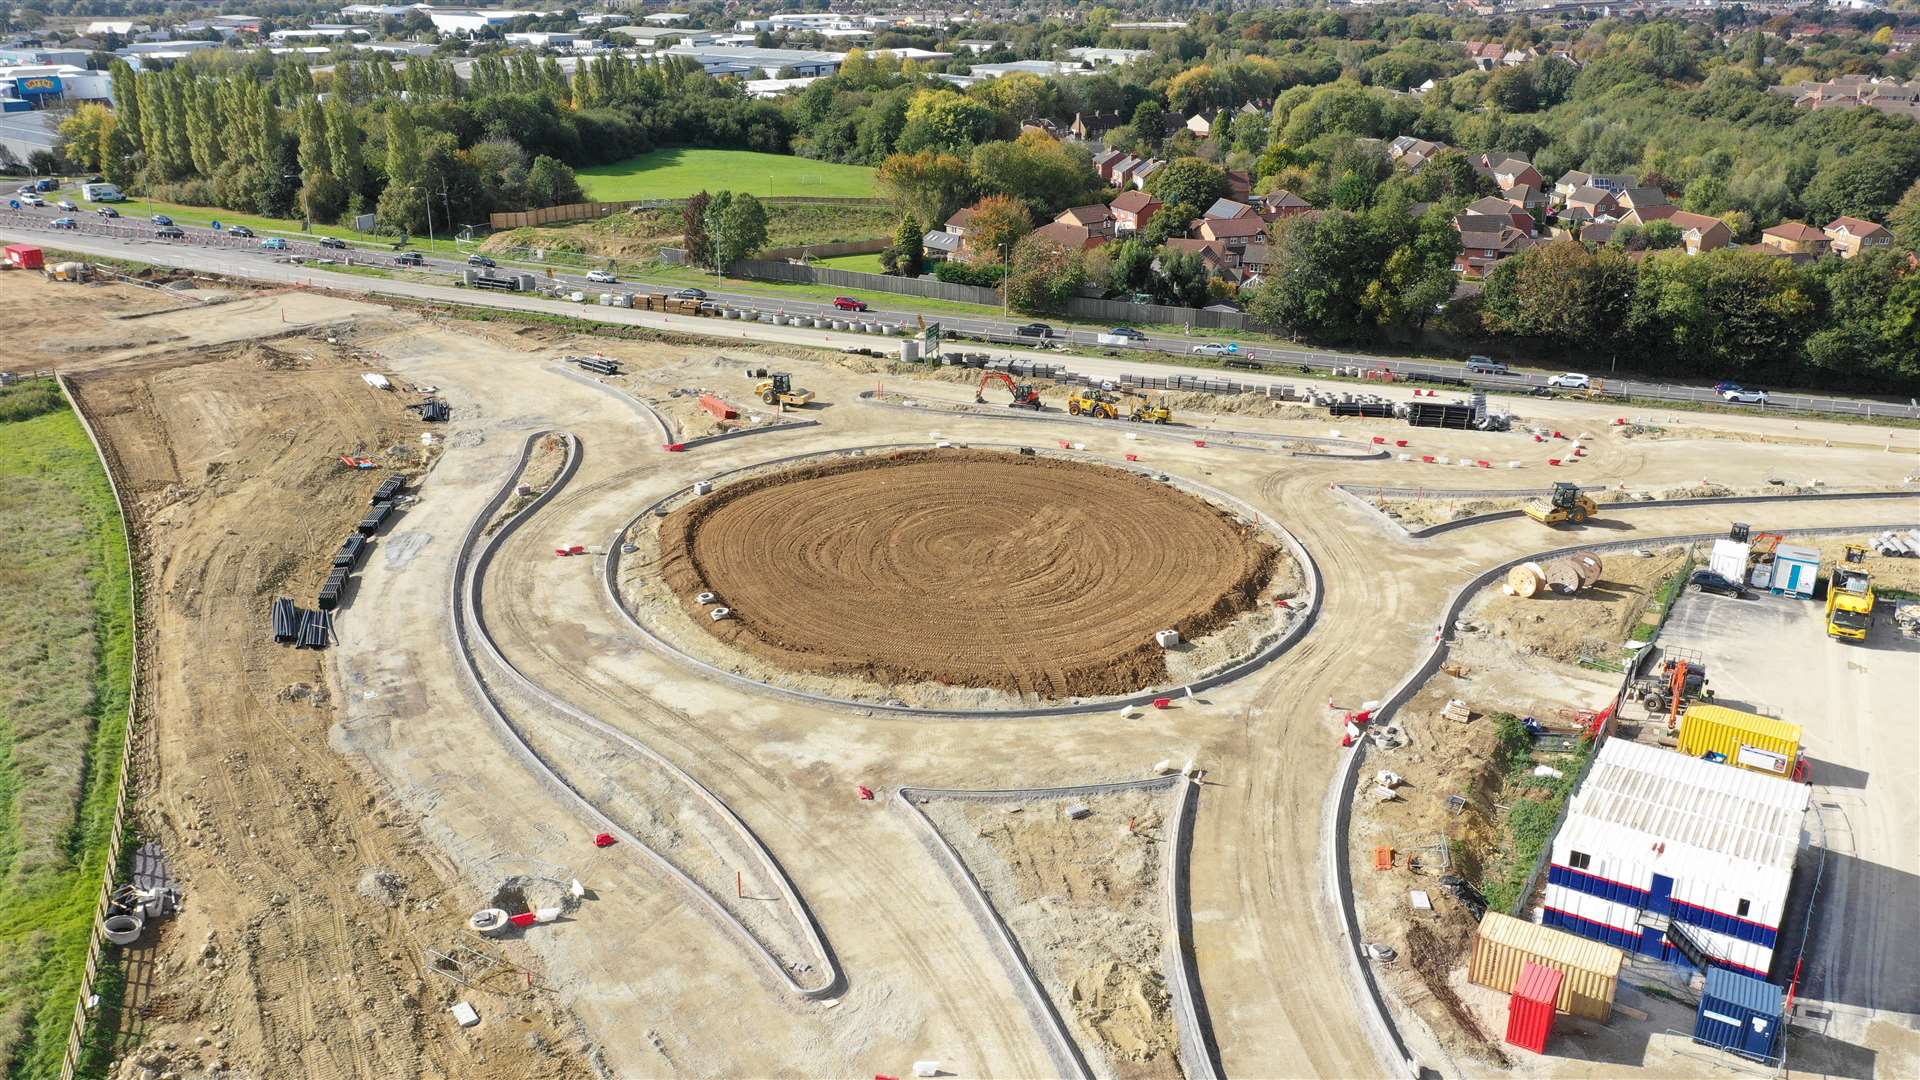 Drivers will be able to use the new roundabout after Christmas. Picture: Vantage Photography / info@vantage-photography.co.uk